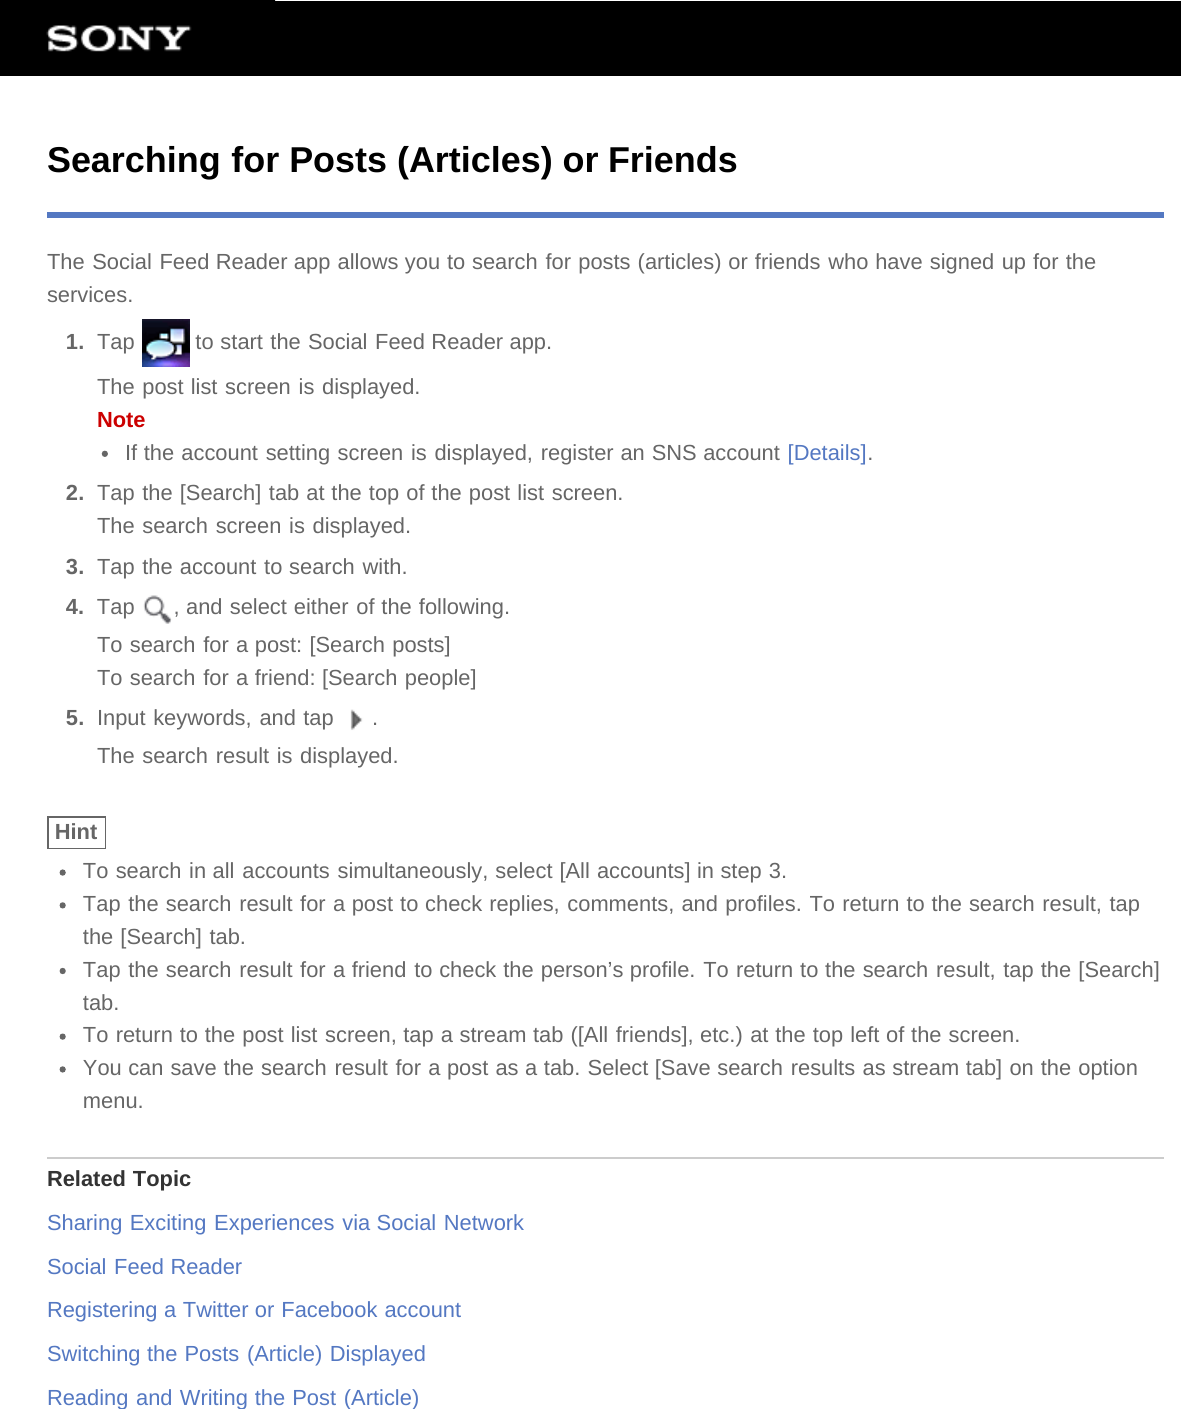 Searching for Posts (Articles) or FriendsThe Social Feed Reader app allows you to search for posts (articles) or friends who have signed up for theservices.1.  Tap   to start the Social Feed Reader app.The post list screen is displayed.NoteIf the account setting screen is displayed, register an SNS account [Details].2.  Tap the [Search] tab at the top of the post list screen.The search screen is displayed.3.  Tap the account to search with.4.  Tap  , and select either of the following.To search for a post: [Search posts]To search for a friend: [Search people]5.  Input keywords, and tap  .The search result is displayed.HintTo search in all accounts simultaneously, select [All accounts] in step 3.Tap the search result for a post to check replies, comments, and profiles. To return to the search result, tapthe [Search] tab.Tap the search result for a friend to check the person’s profile. To return to the search result, tap the [Search]tab.To return to the post list screen, tap a stream tab ([All friends], etc.) at the top left of the screen.You can save the search result for a post as a tab. Select [Save search results as stream tab] on the optionmenu.Related TopicSharing Exciting Experiences via Social NetworkSocial Feed ReaderRegistering a Twitter or Facebook accountSwitching the Posts (Article) DisplayedReading and Writing the Post (Article)